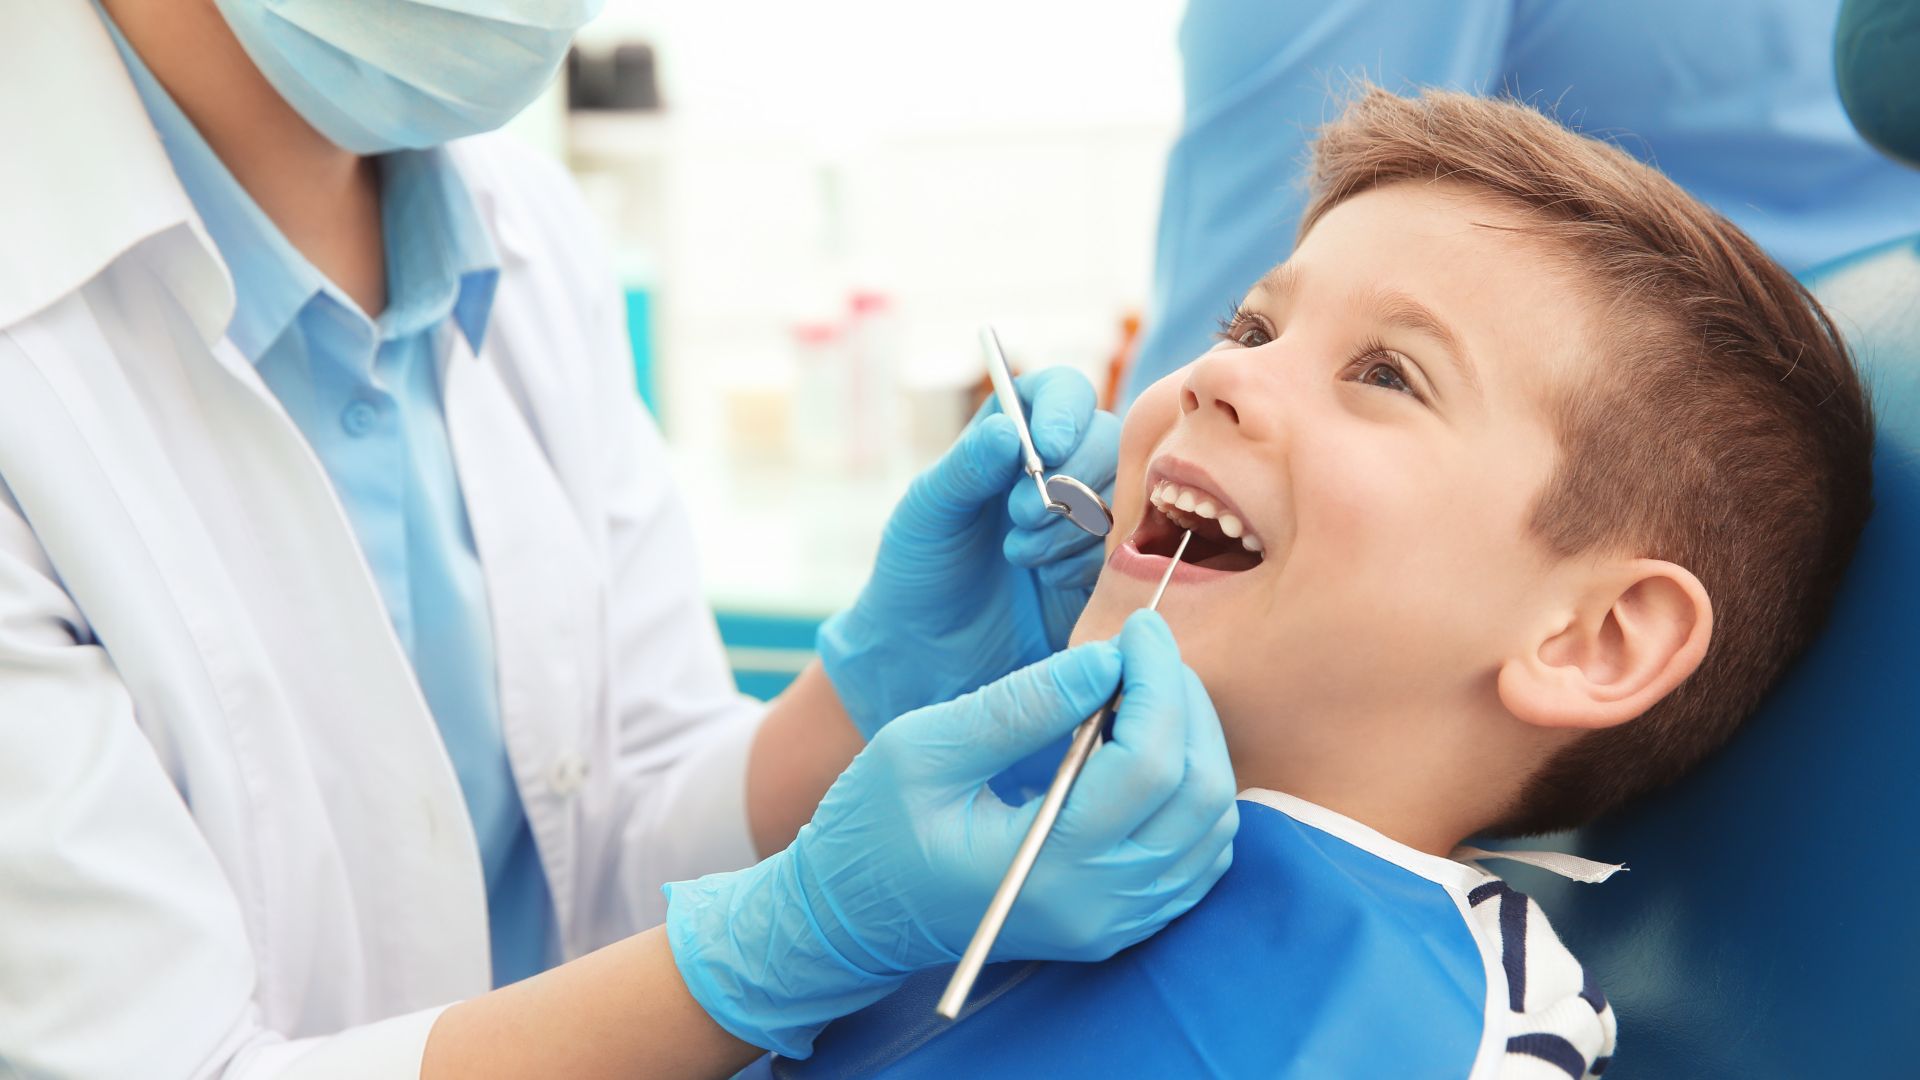 Dentist Checking Boy's Teeth Before Removal